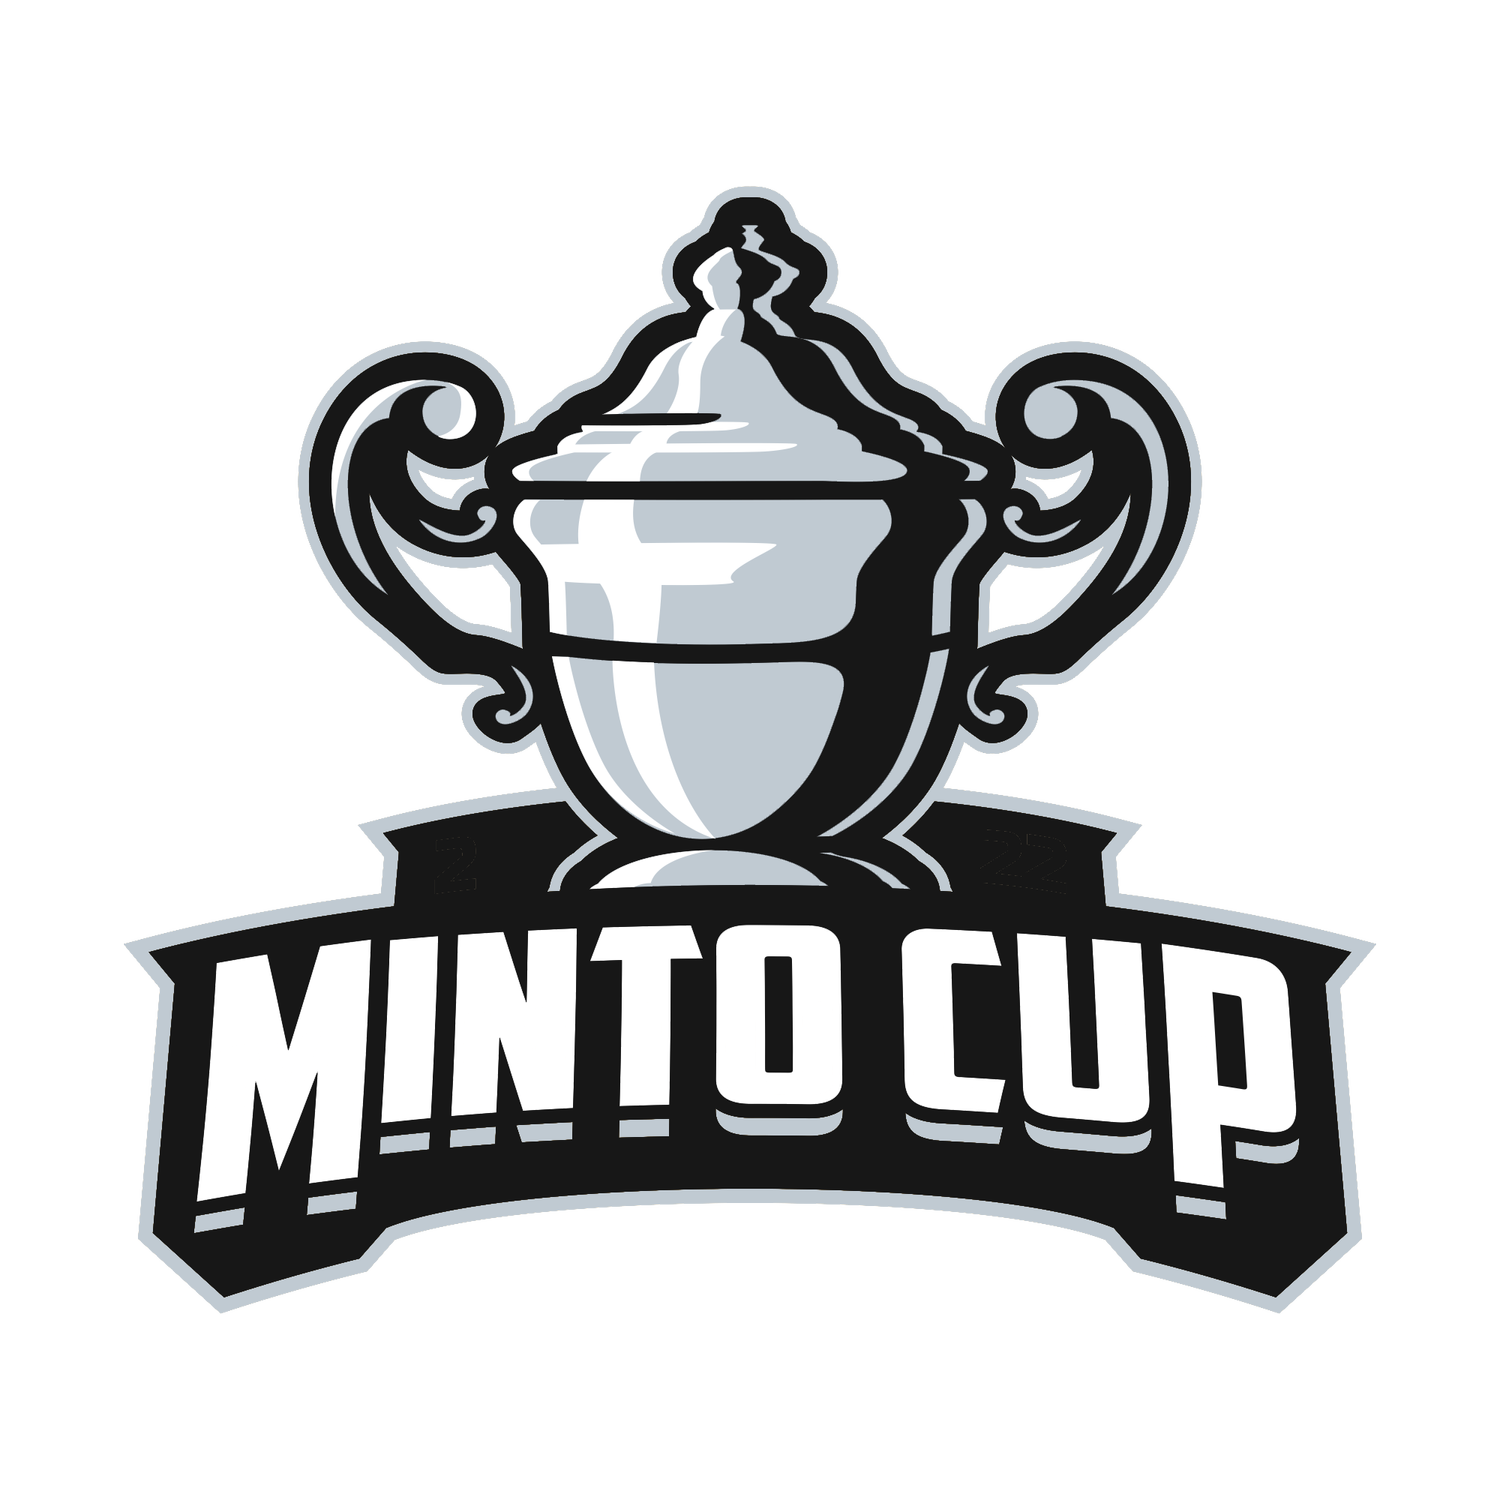 The Minto Cup